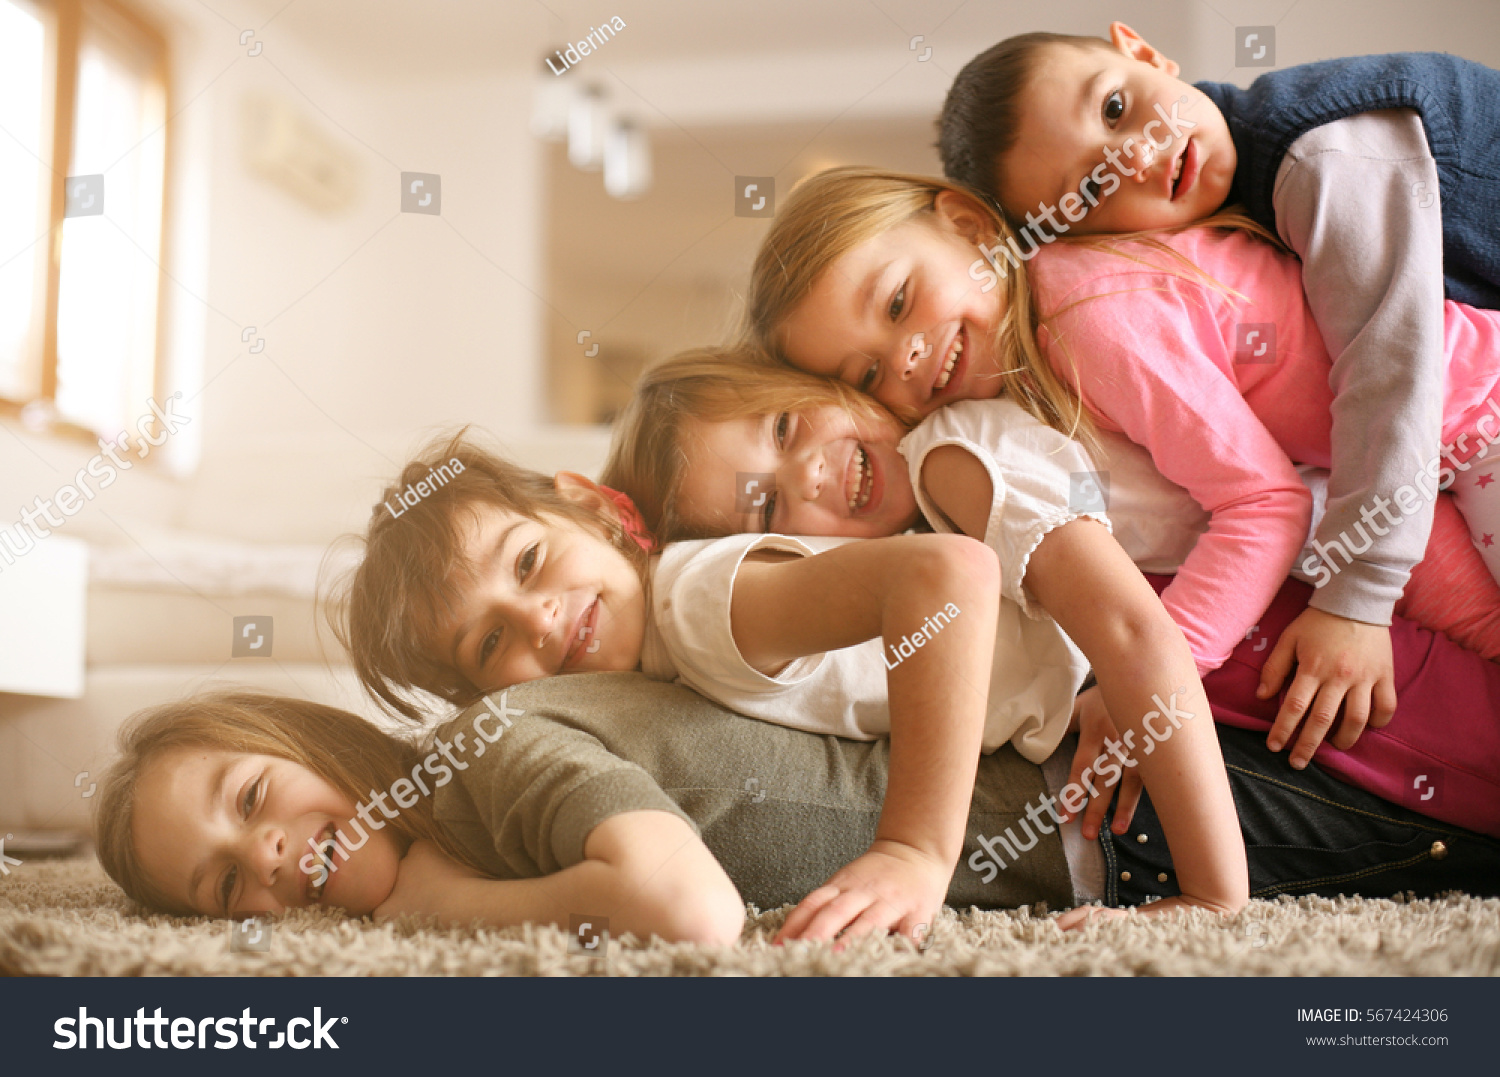 Large group of children lying at floor and having fun. Looking at camera. #567424306